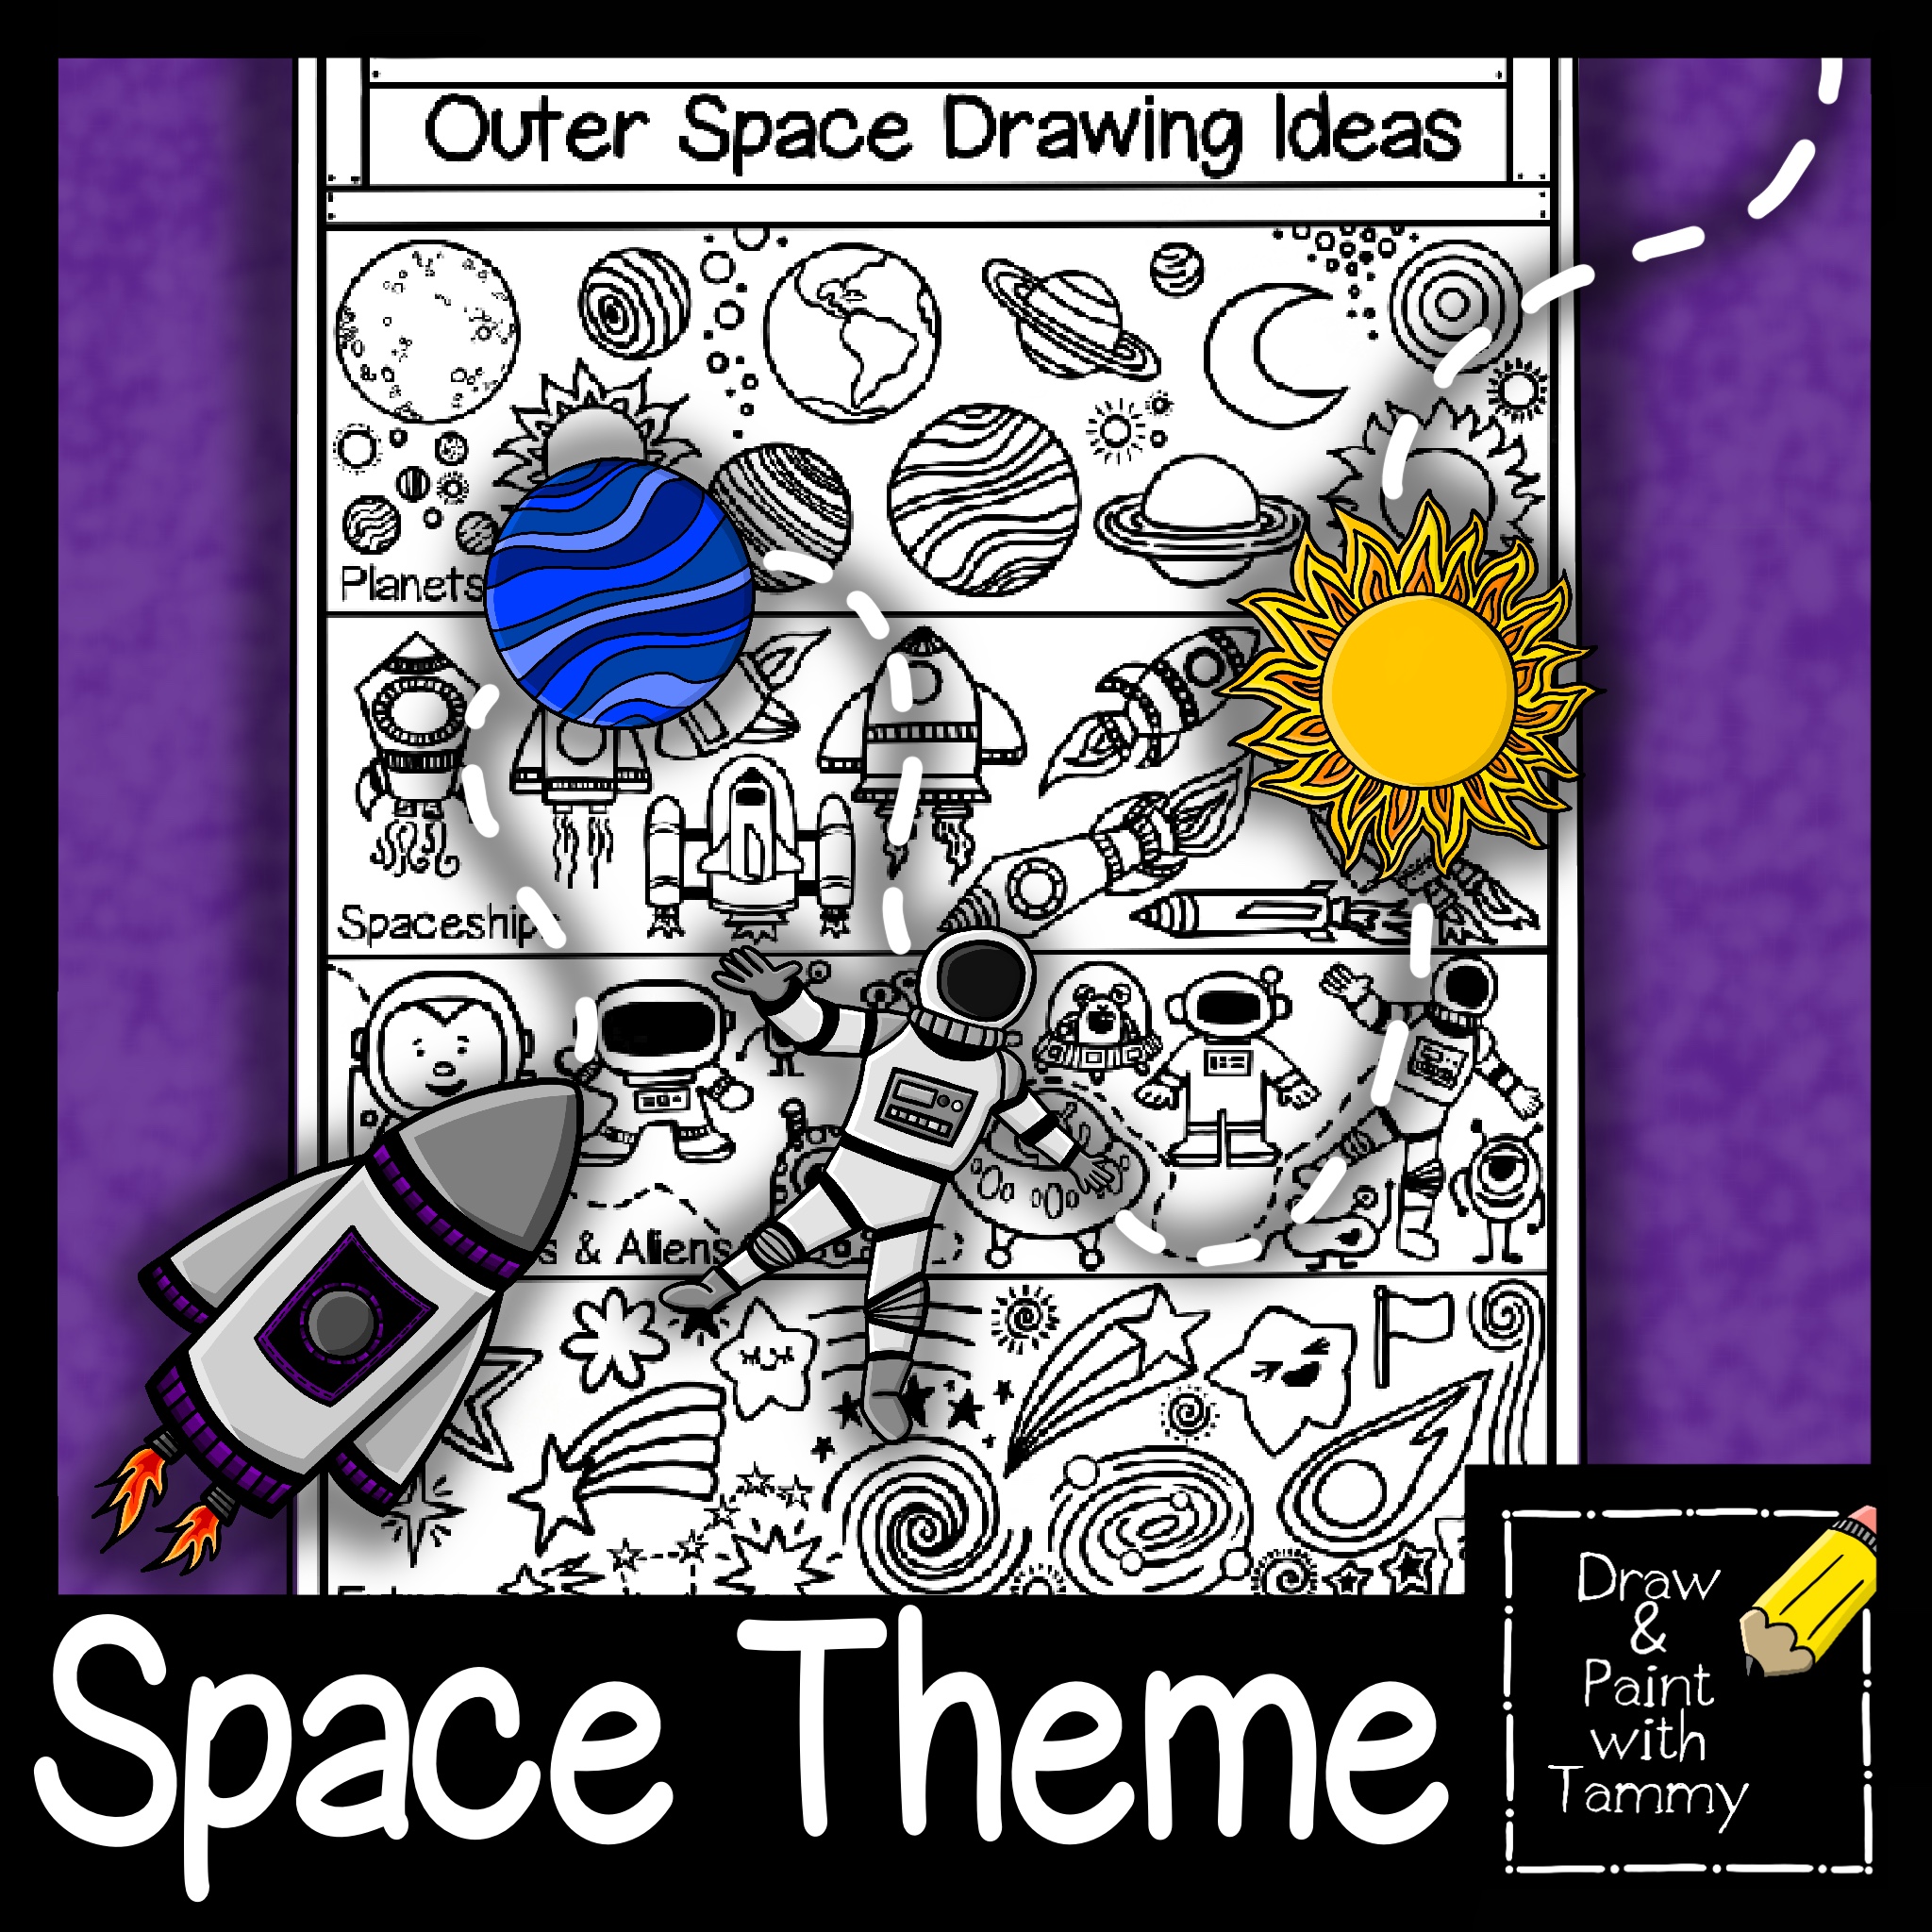 Childrens Drawing Astronaut Planets Stars On A Dark Blue Background Stock  Illustration - Download Image Now - iStock